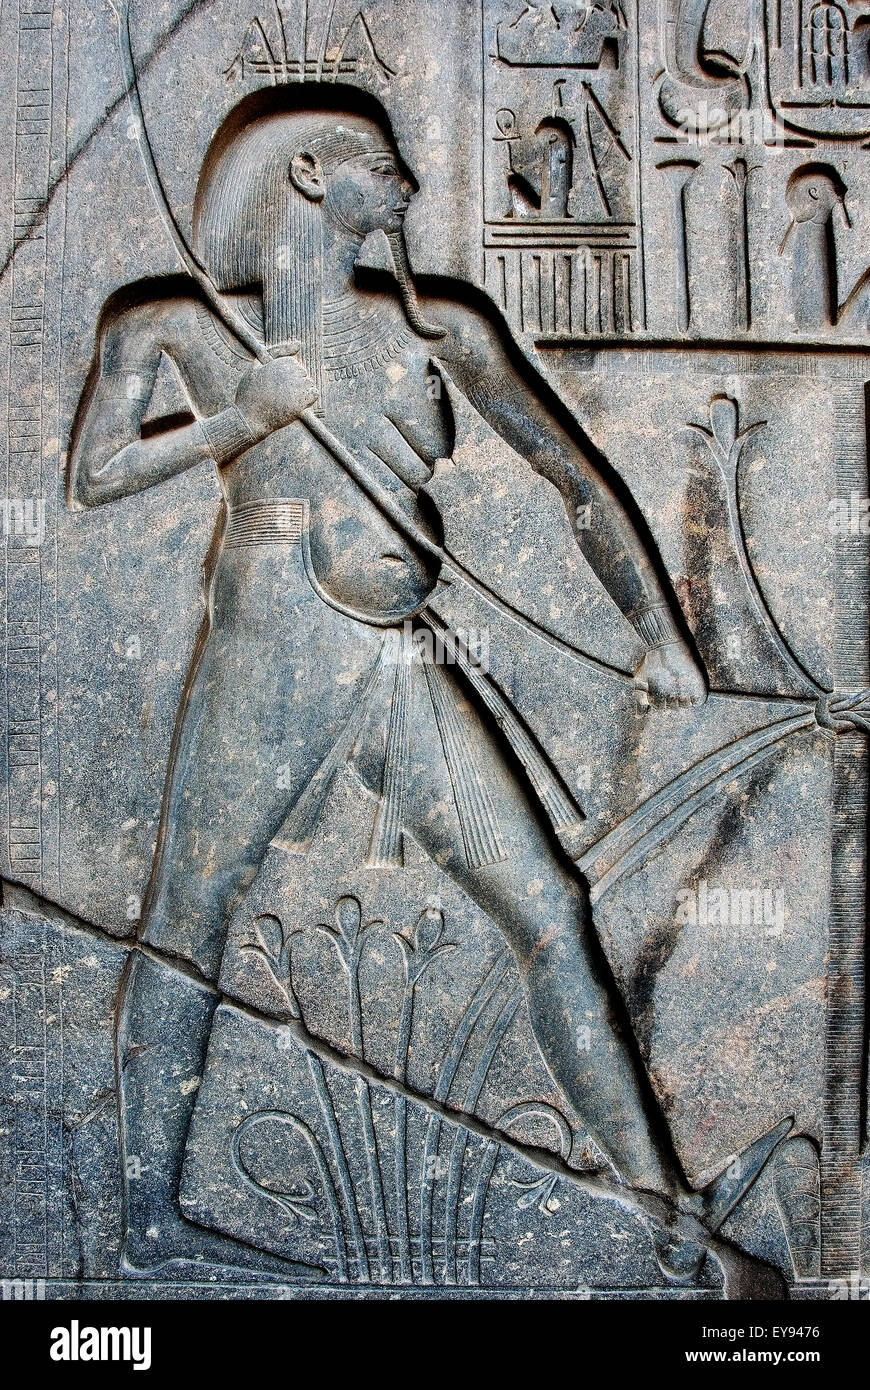 Luxor, Egypt. Temple of Luxor (Ipet resyt): sculpture in the base of the giant statue of king Ramses II. Stock Photo